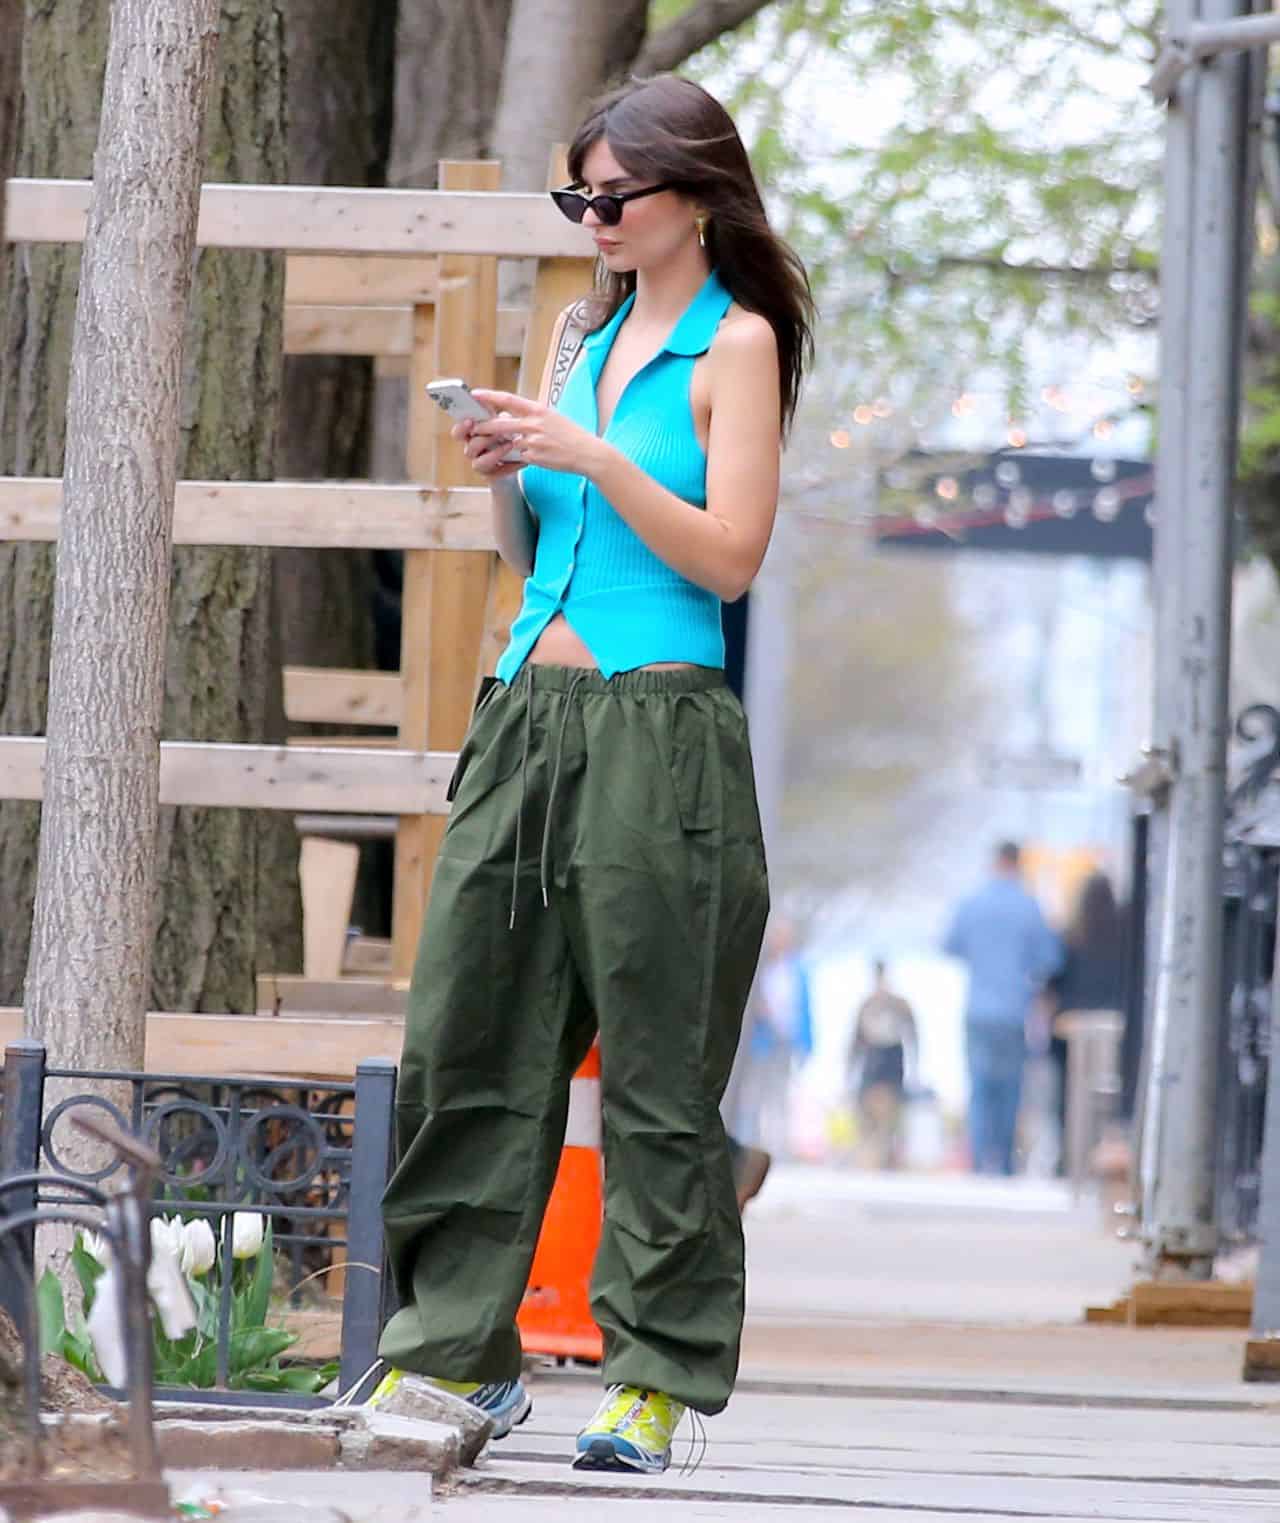 Emily Ratajkowski Shows Off Her Awesome Street Style in NYC